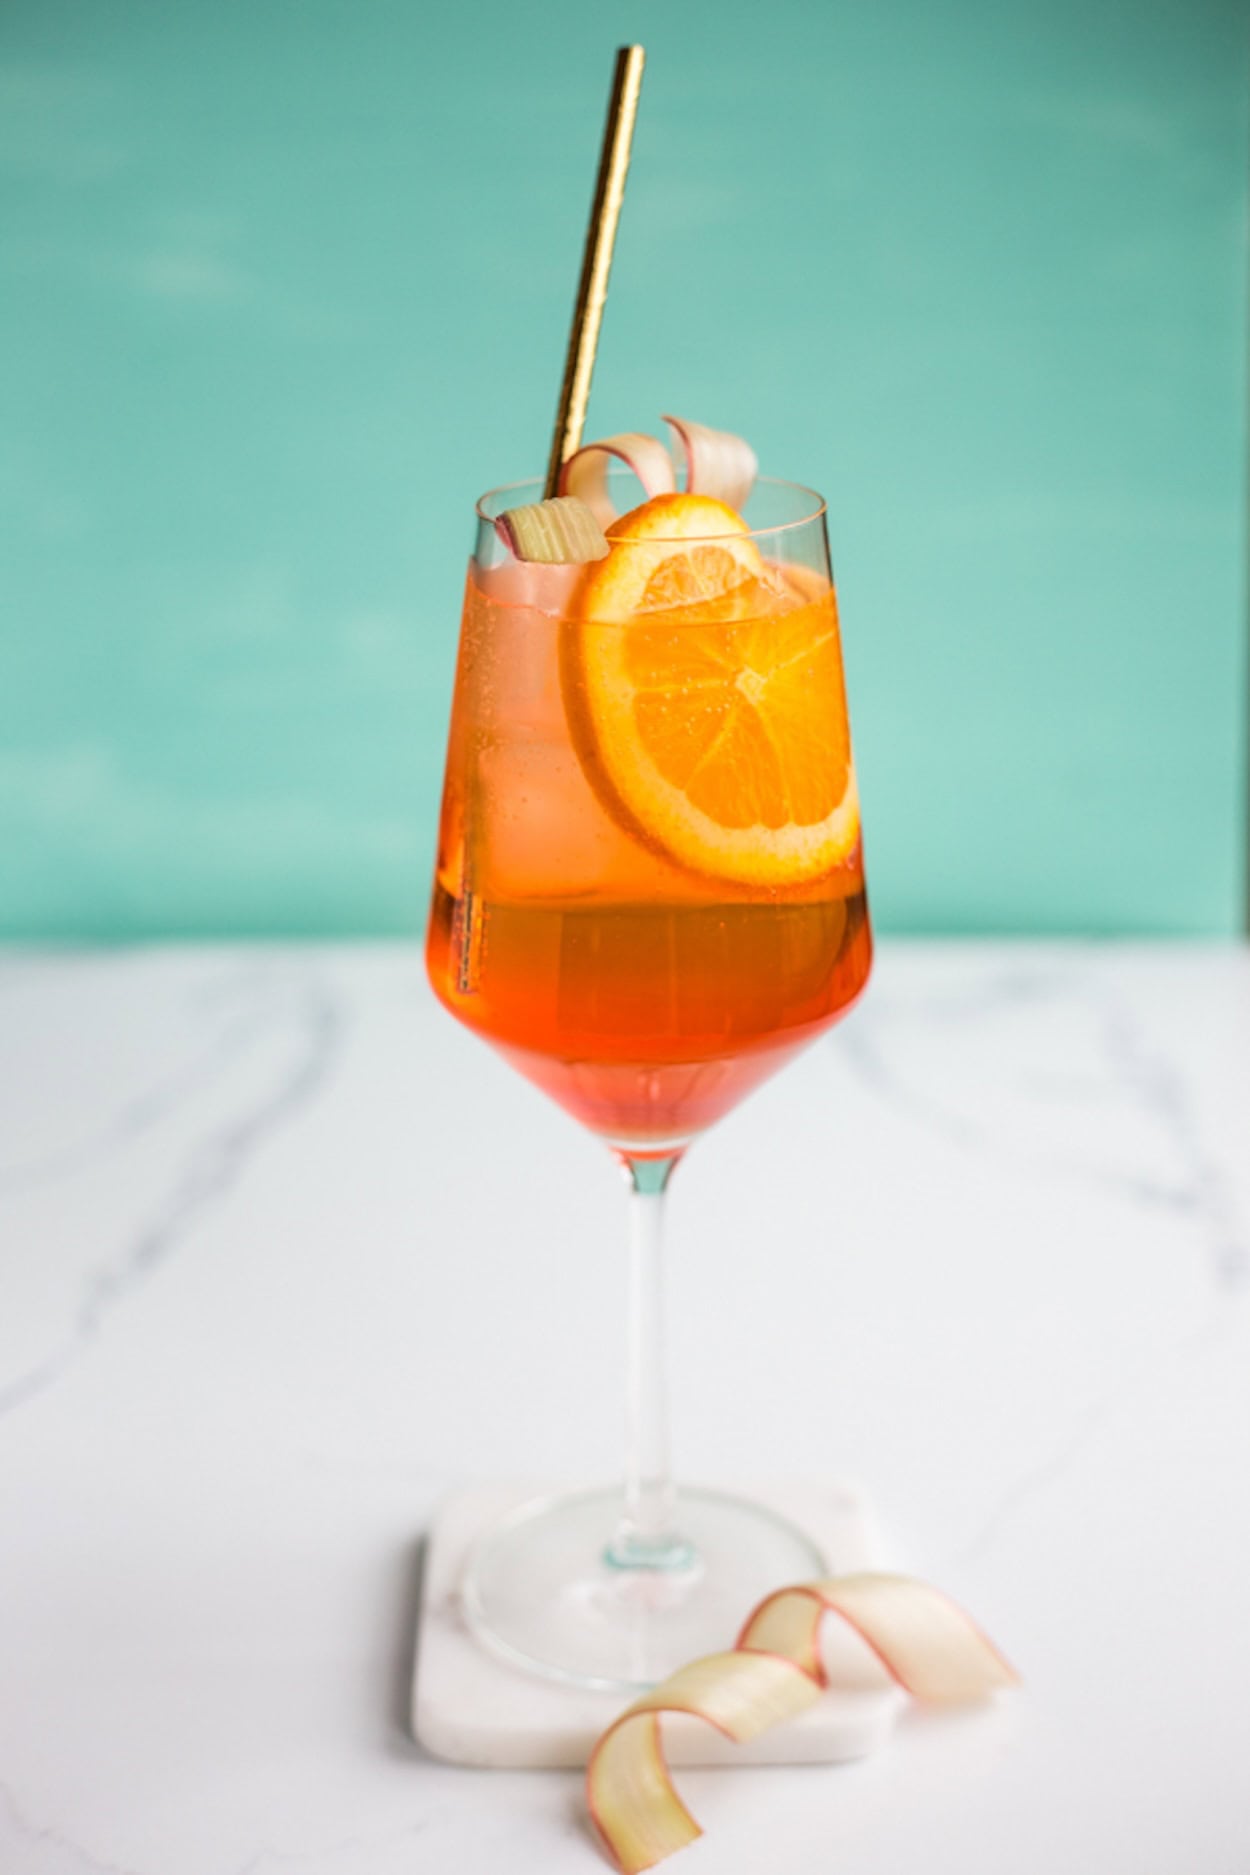 An aperol spritz in a wine glass with a gold straw set against a light blue background